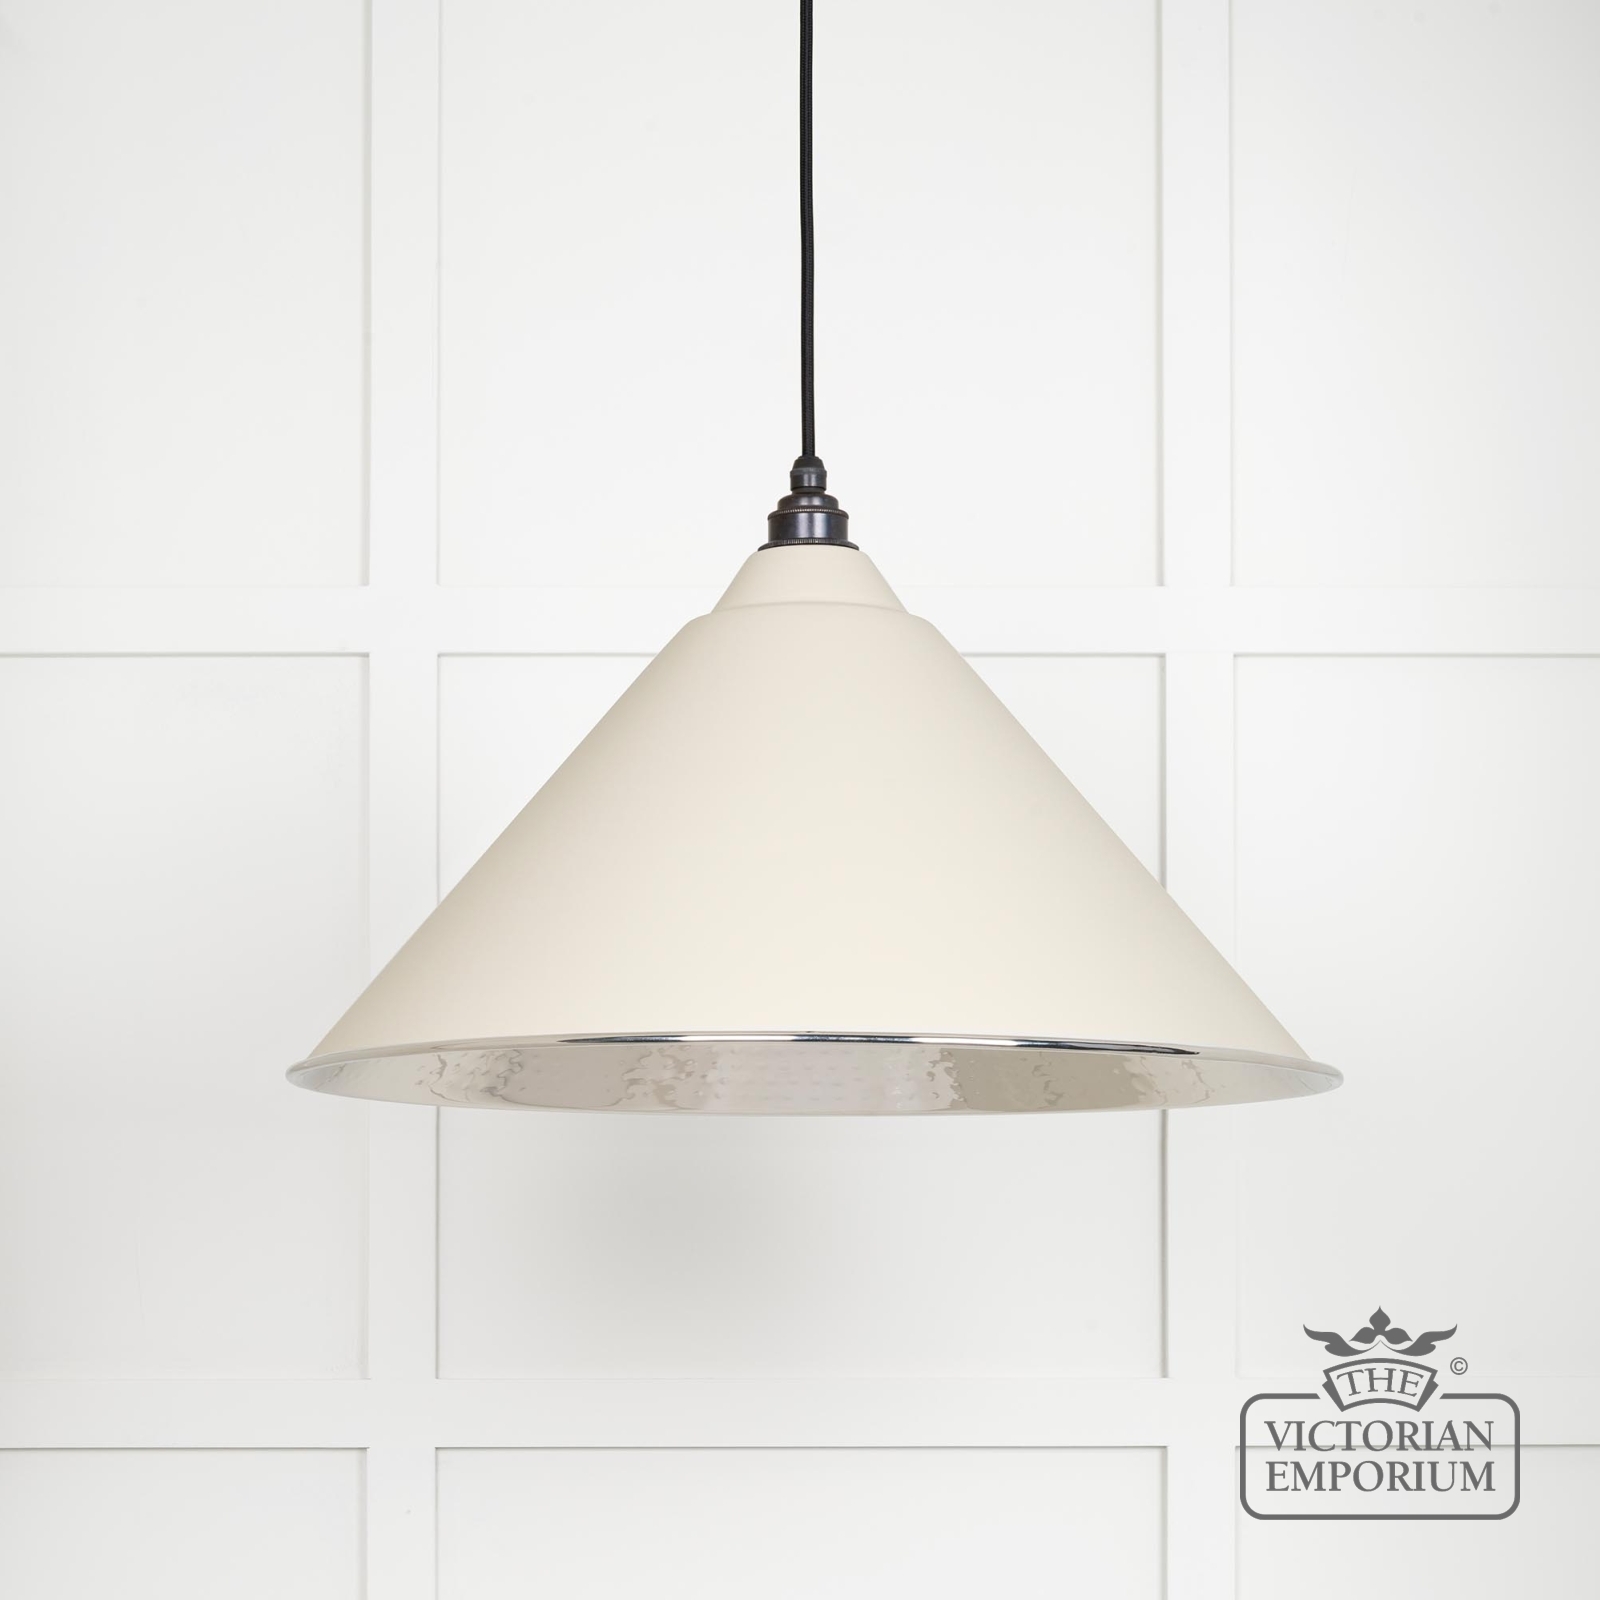 Hockliffe pendant light in hammered nickel and off white exterior